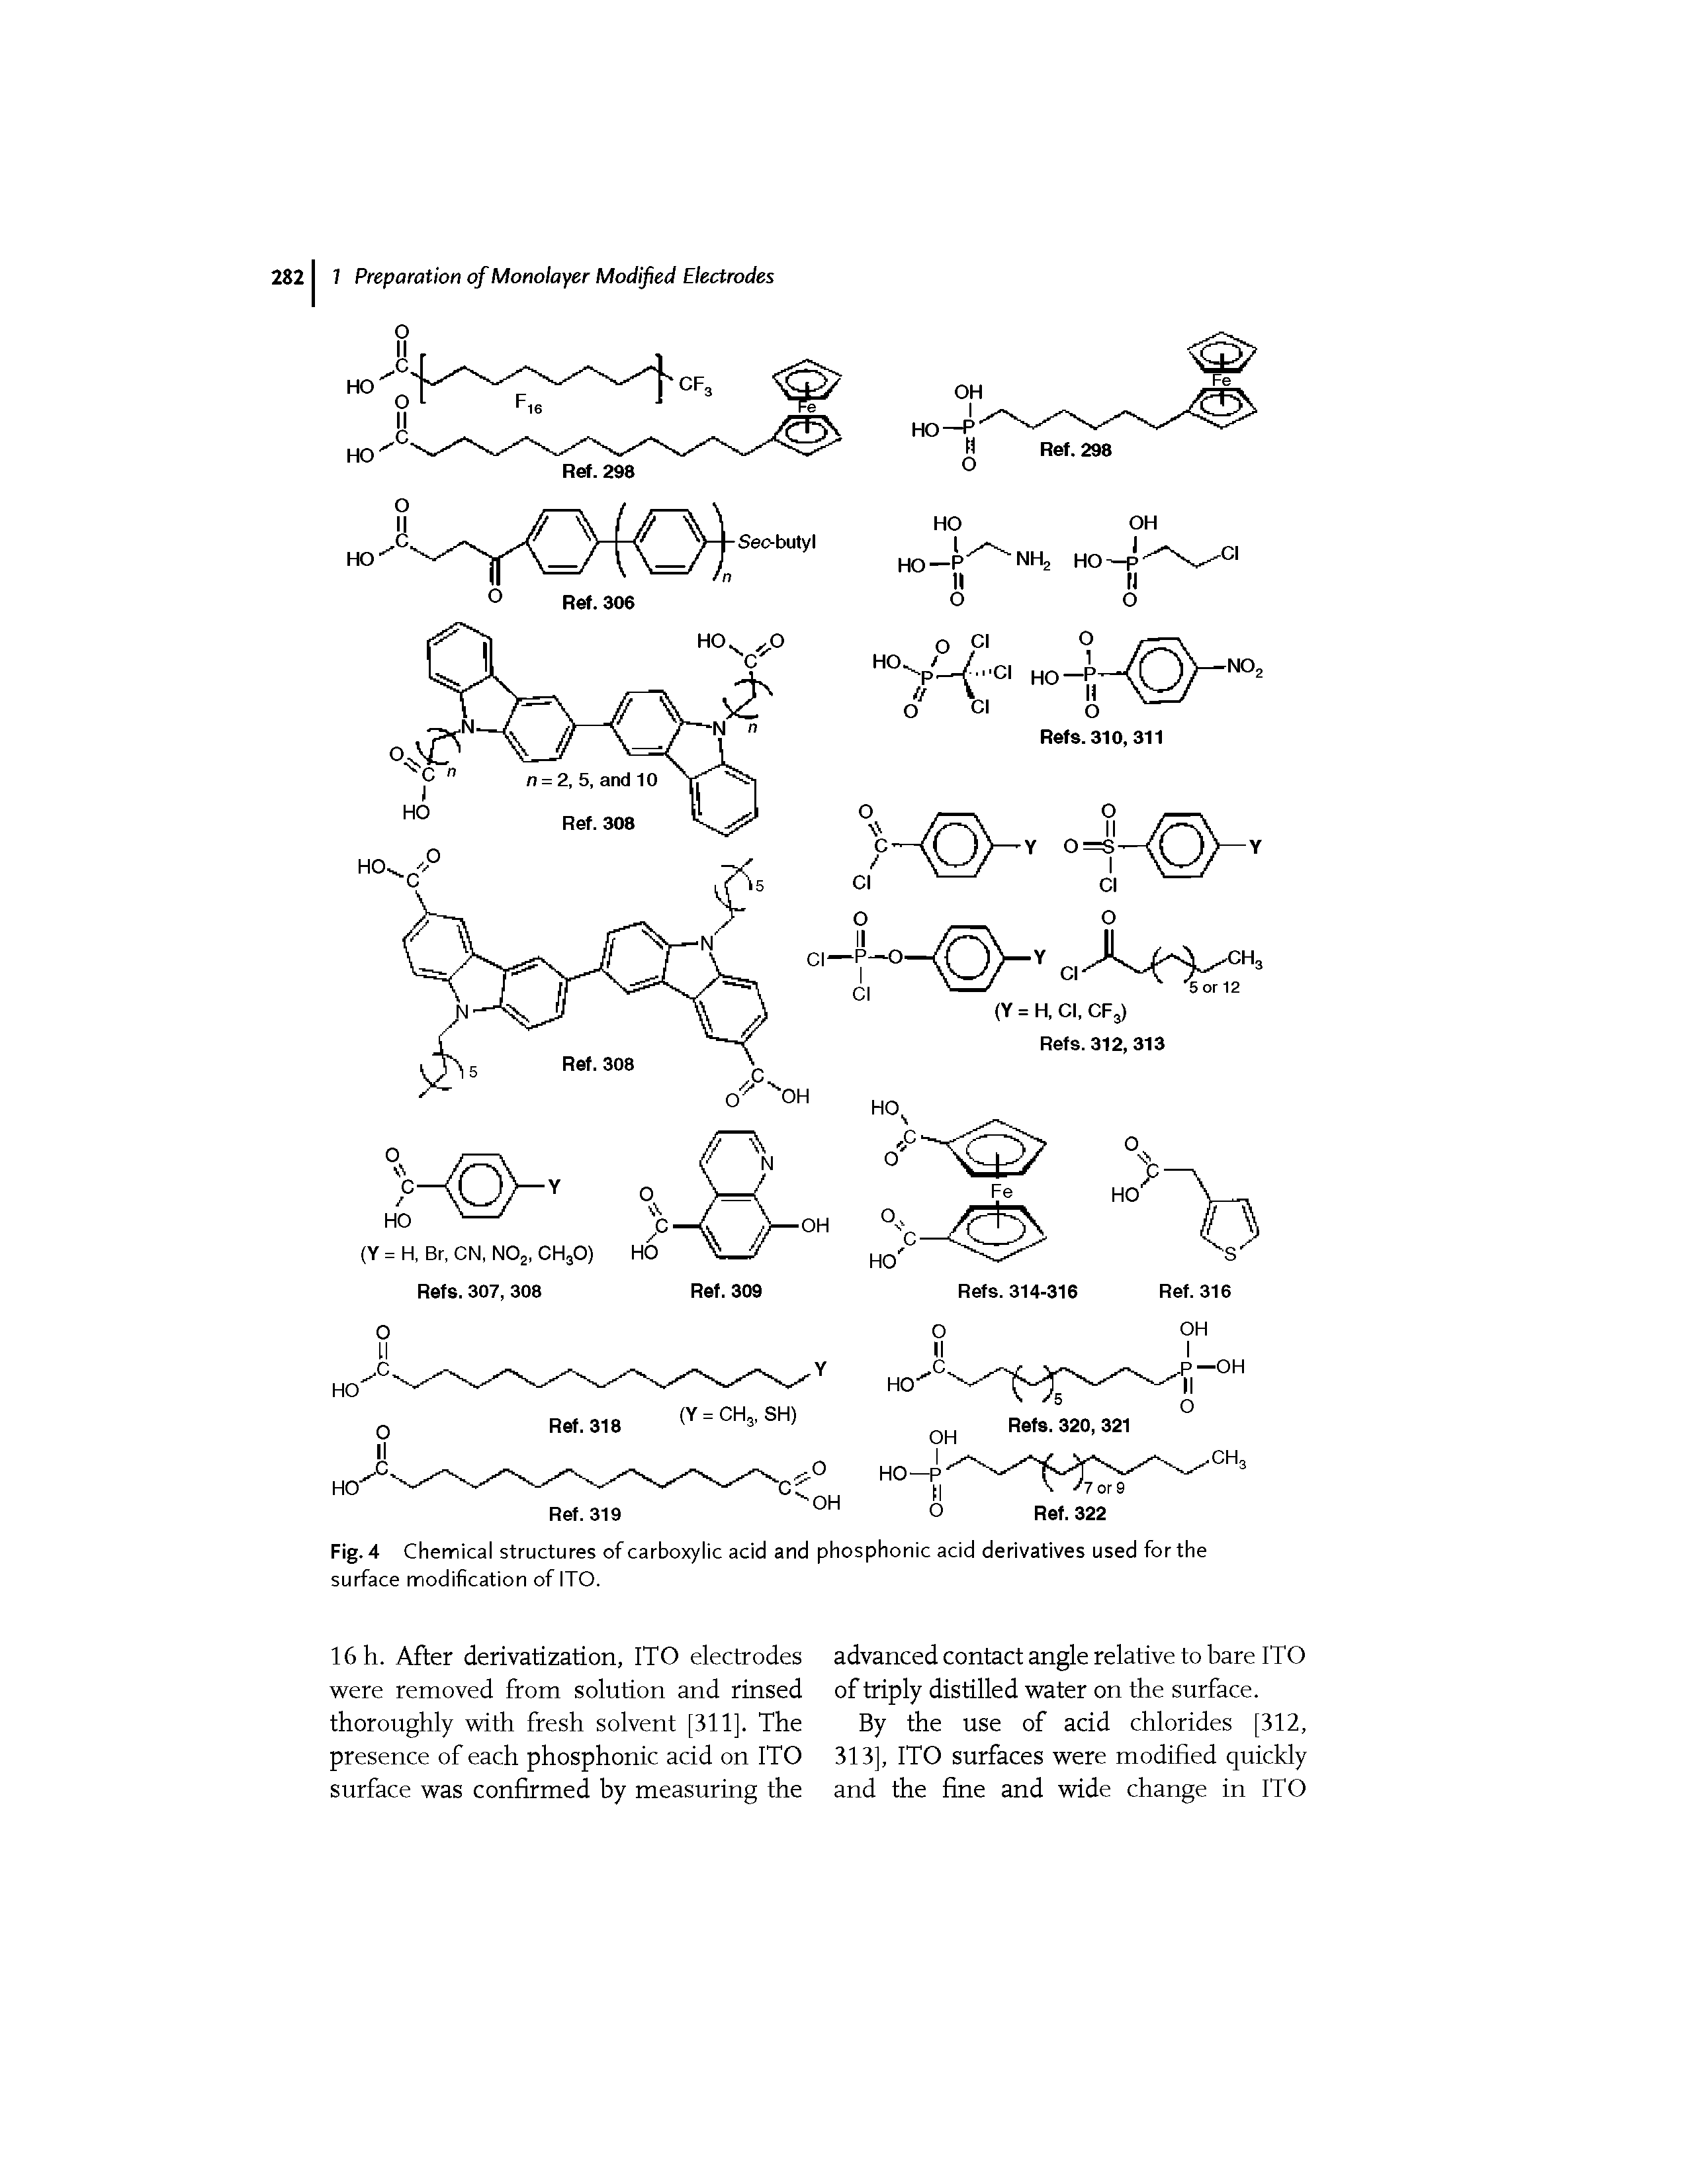 Fig. 4 Chemical structures of carboxylic acid and phosphonic acid derivatives used for the surface modification of ITO.